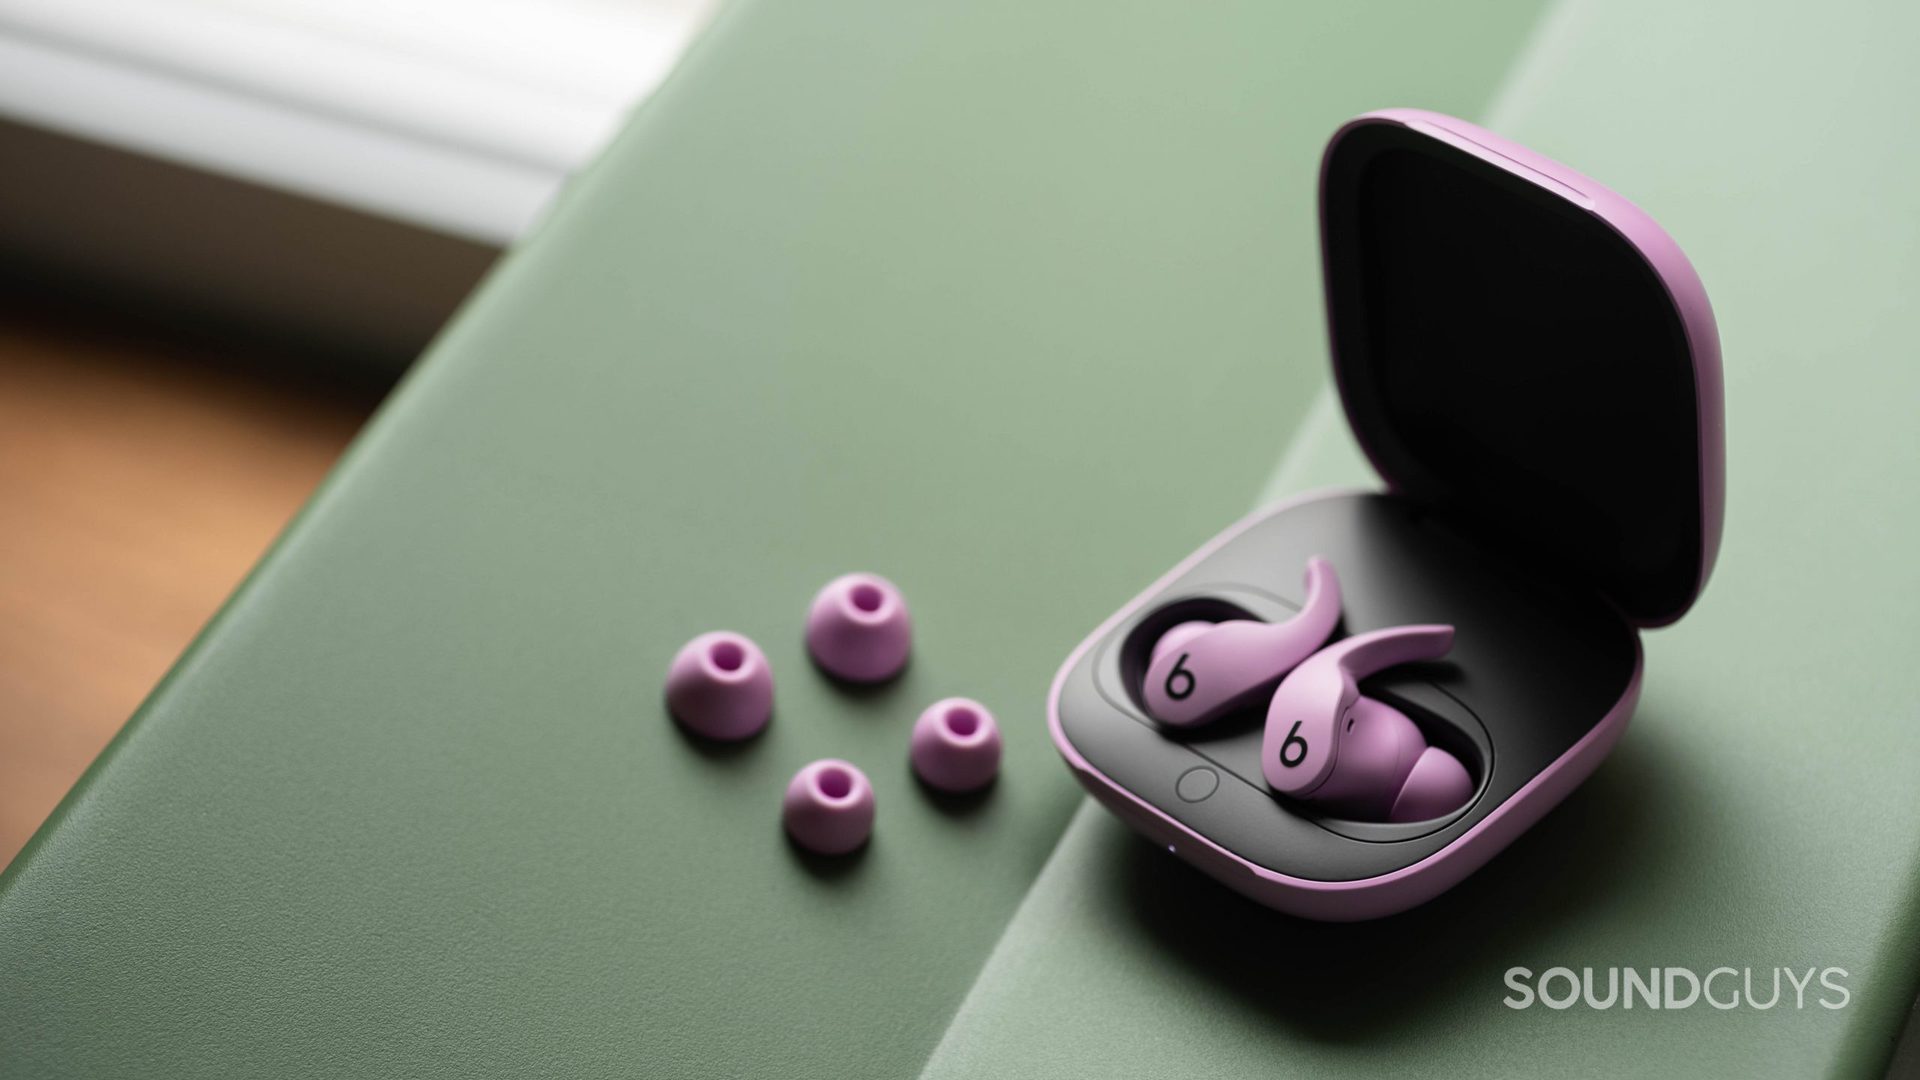 Beats Fit Pro noise cancelling true wireless earbuds inside the case, showing different ear tip sizes.